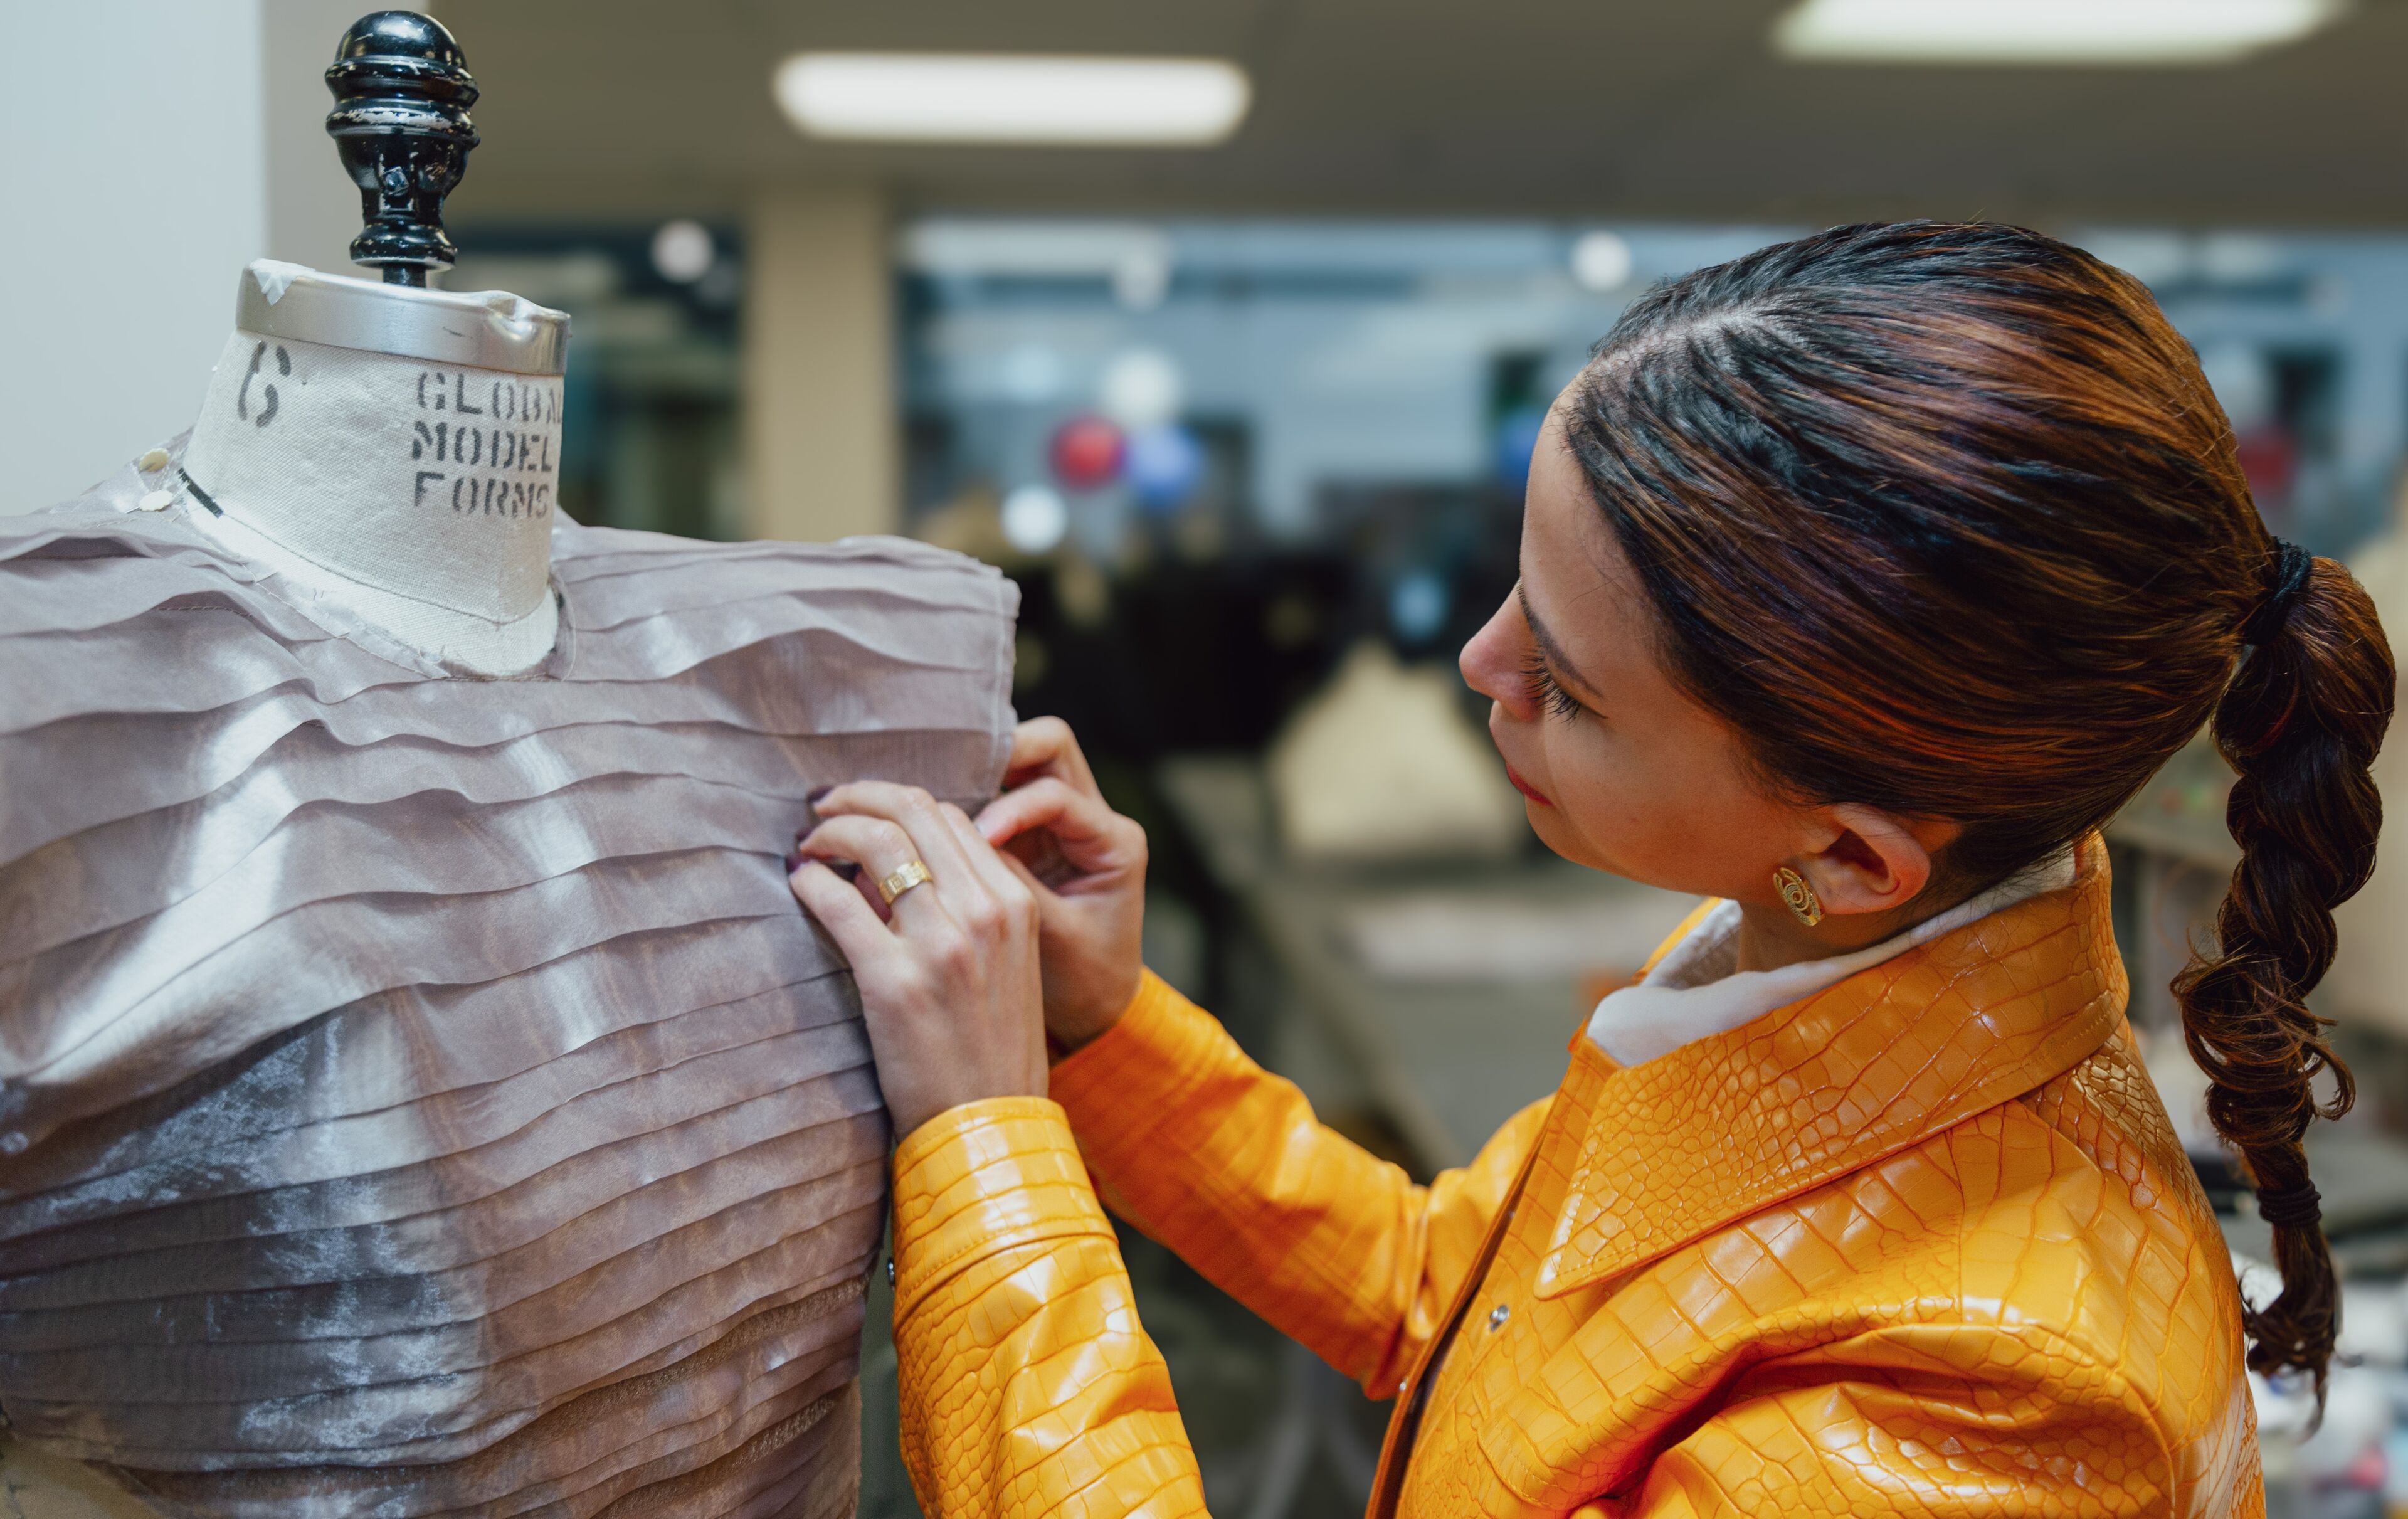 A designer meticulously adjusts the folds on a layered fabric dress on a mannequin, showcasing the careful art of fashion design.